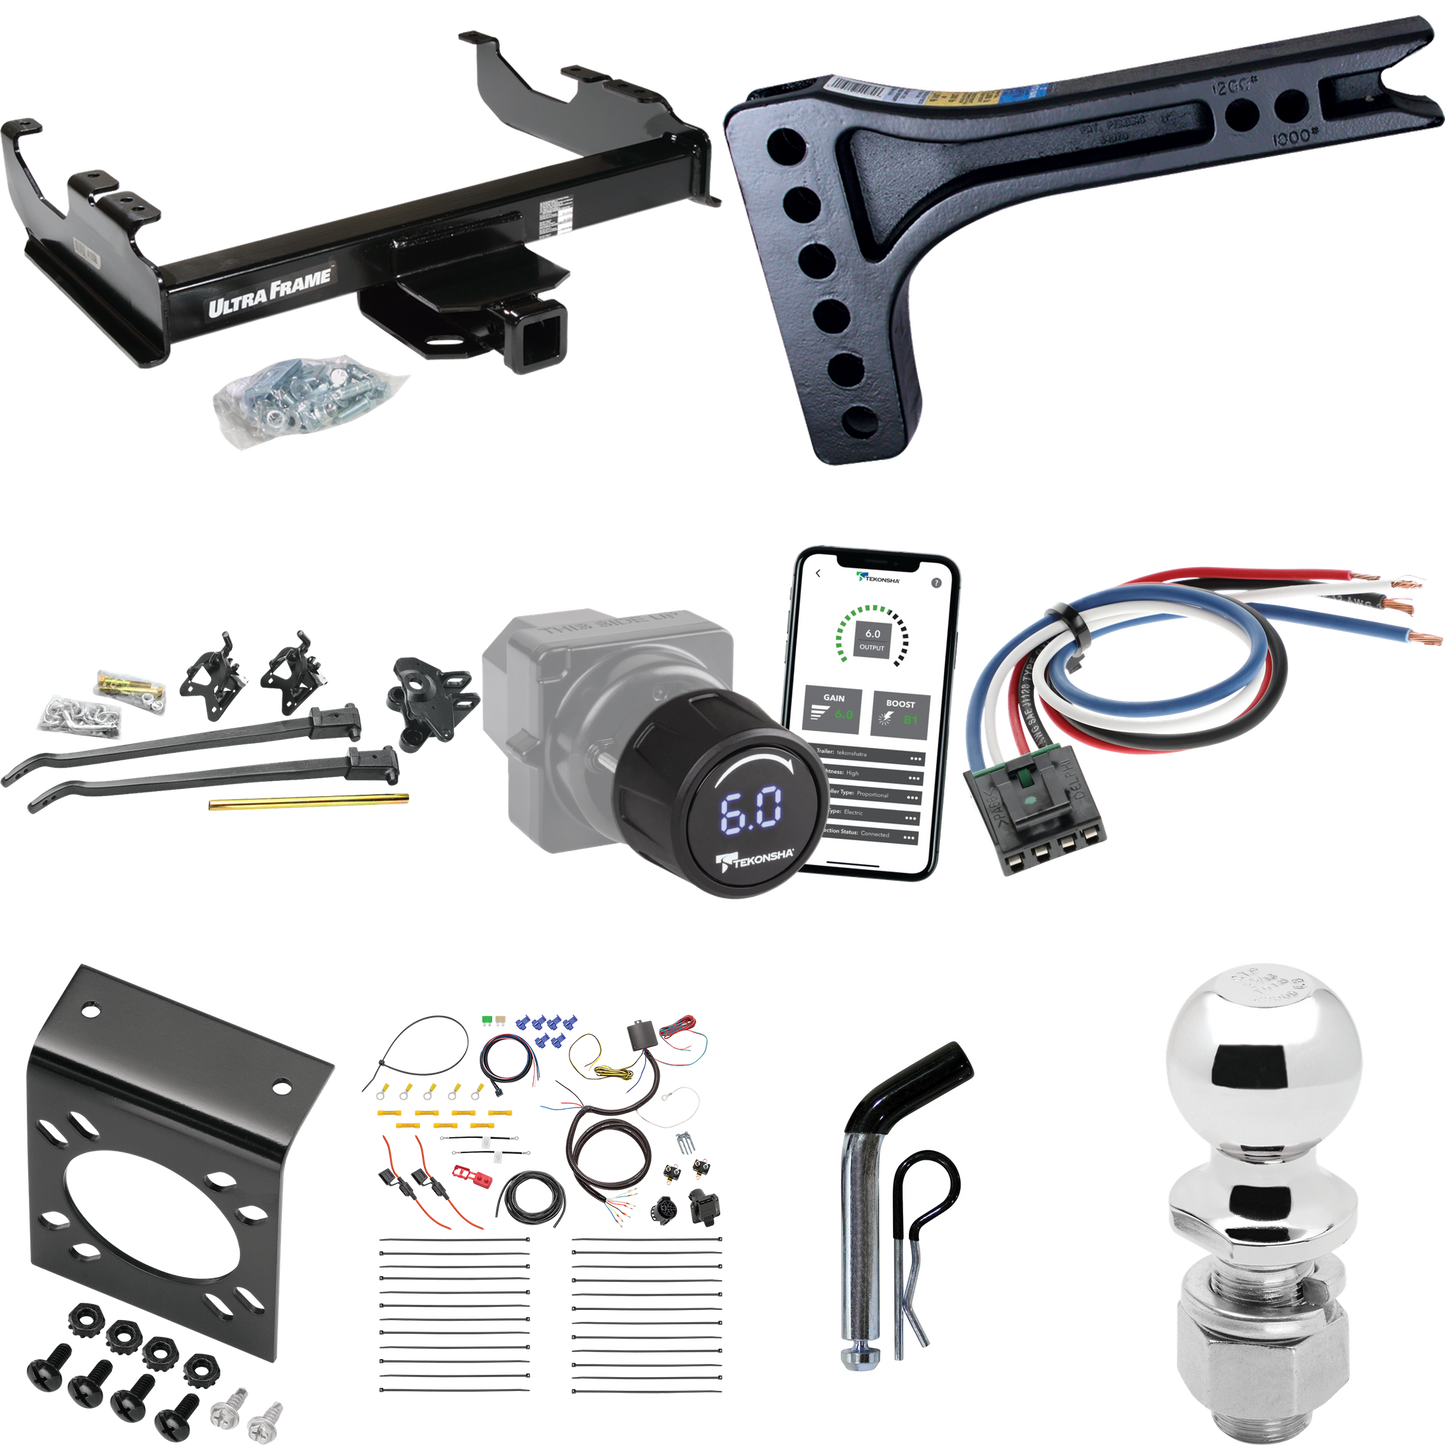 Fits 2007-2014 GMC Sierra 3500 HD Trailer Hitch Tow PKG w/ 15K Trunnion Bar Weight Distribution Hitch + Pin/Clip + 2-5/16" Ball + Tekonsha Prodigy iD Bluetooth Wireless Brake Control + Generic BC Wiring Adapter + 7-Way RV Wiring (For Cab & Chassis, w